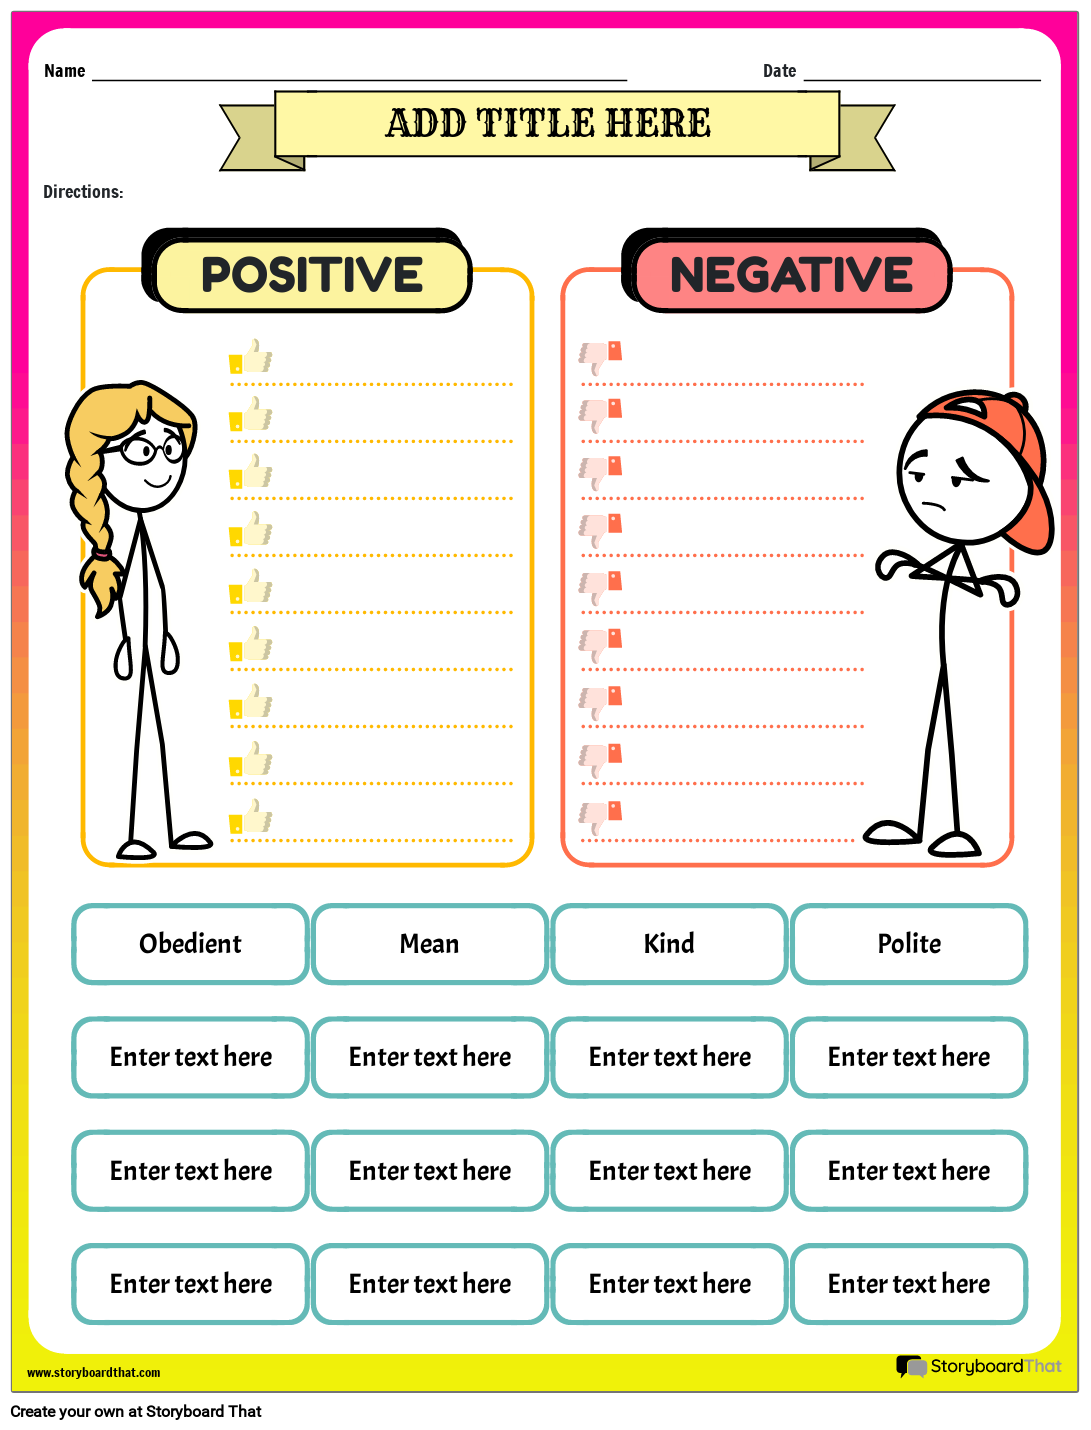 Identifying Positive and Negative Character Traits